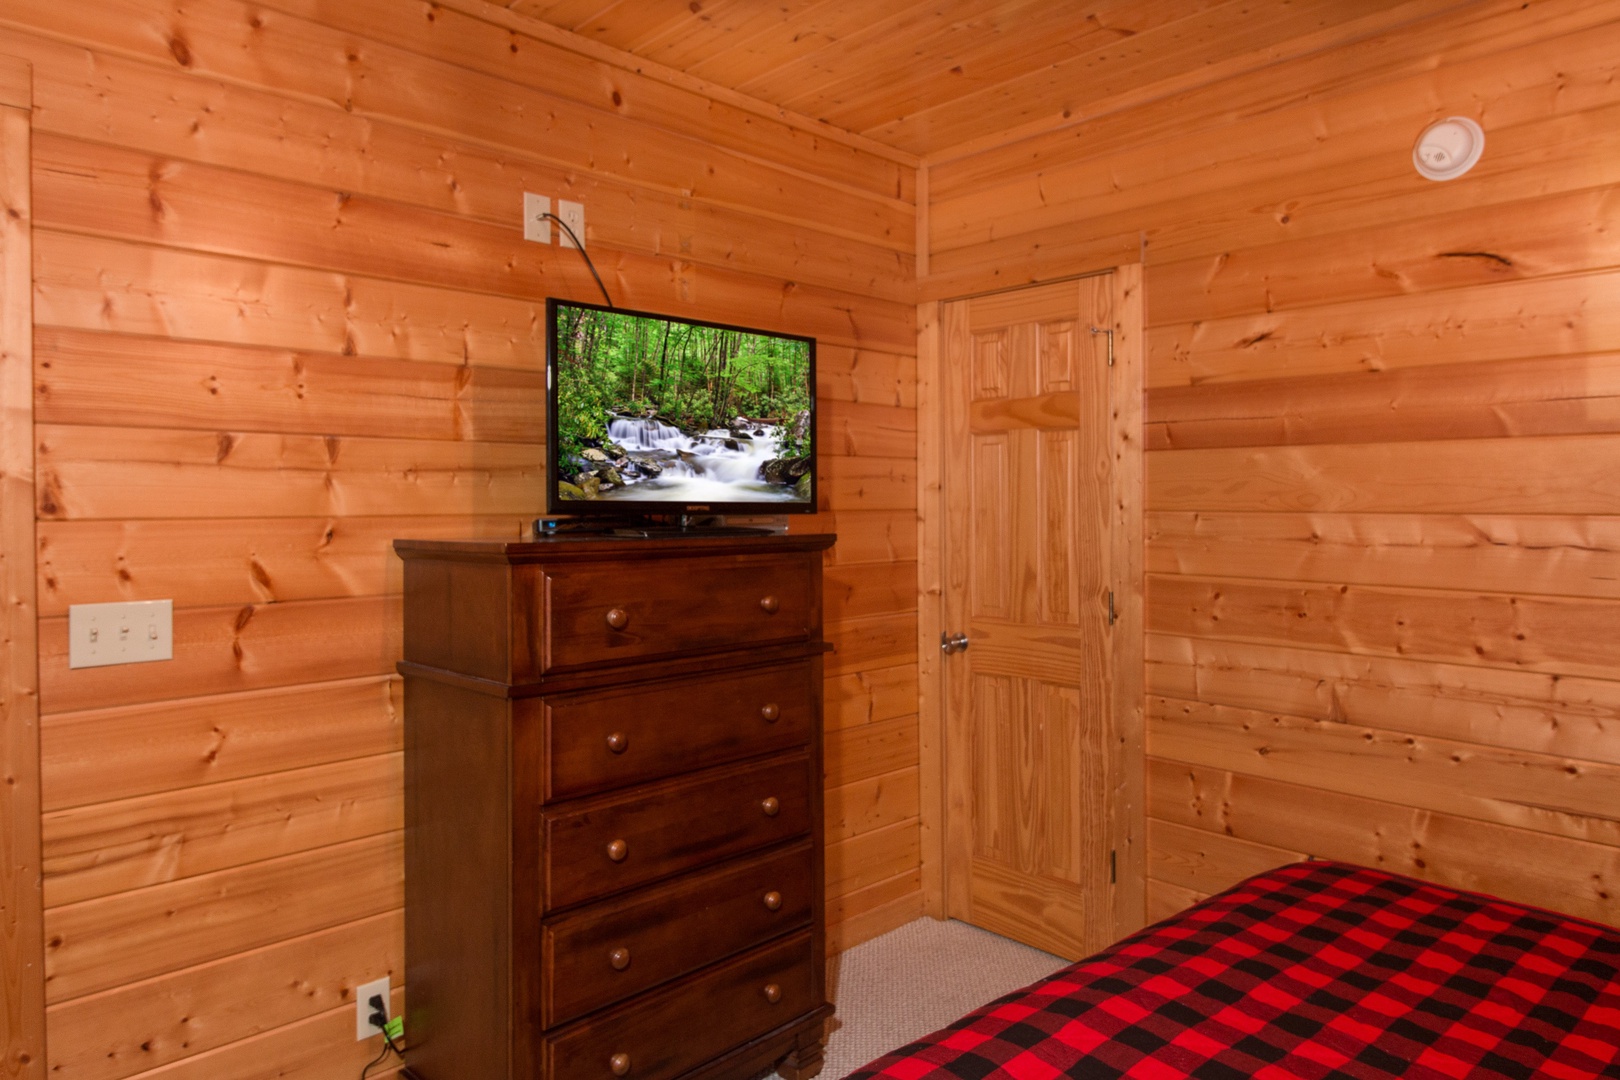 Bedroom Flat Screen at Family Ties Lodge, a 4 bedroom cabin rental located in pigeon forge